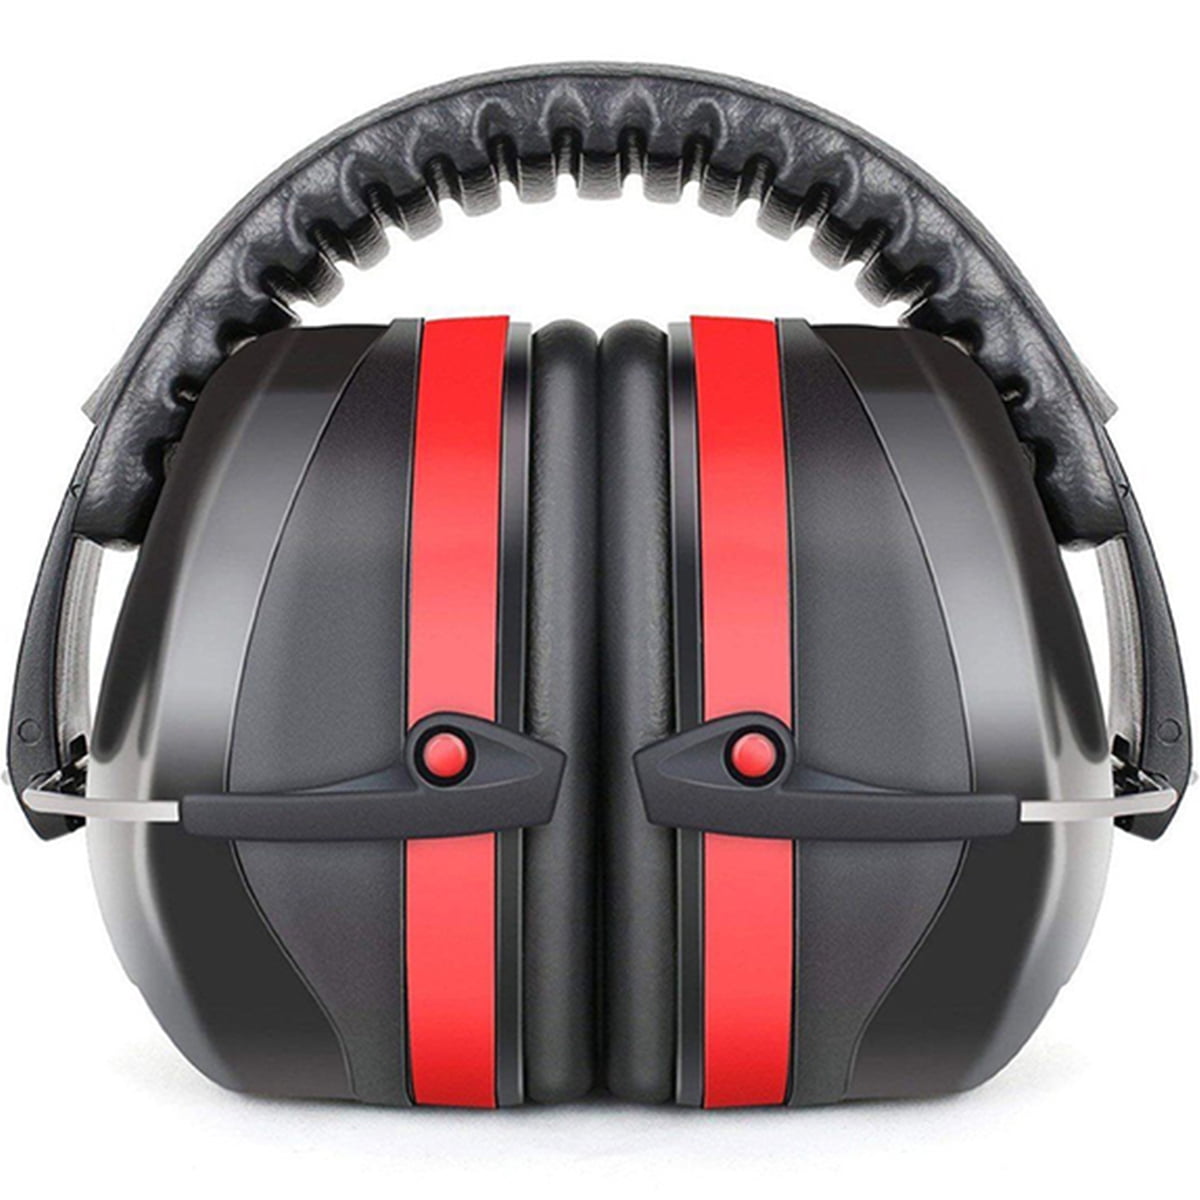 Ear Muffs Hearing Protection Noise Cancelling Headphones Defenders For Shooting 